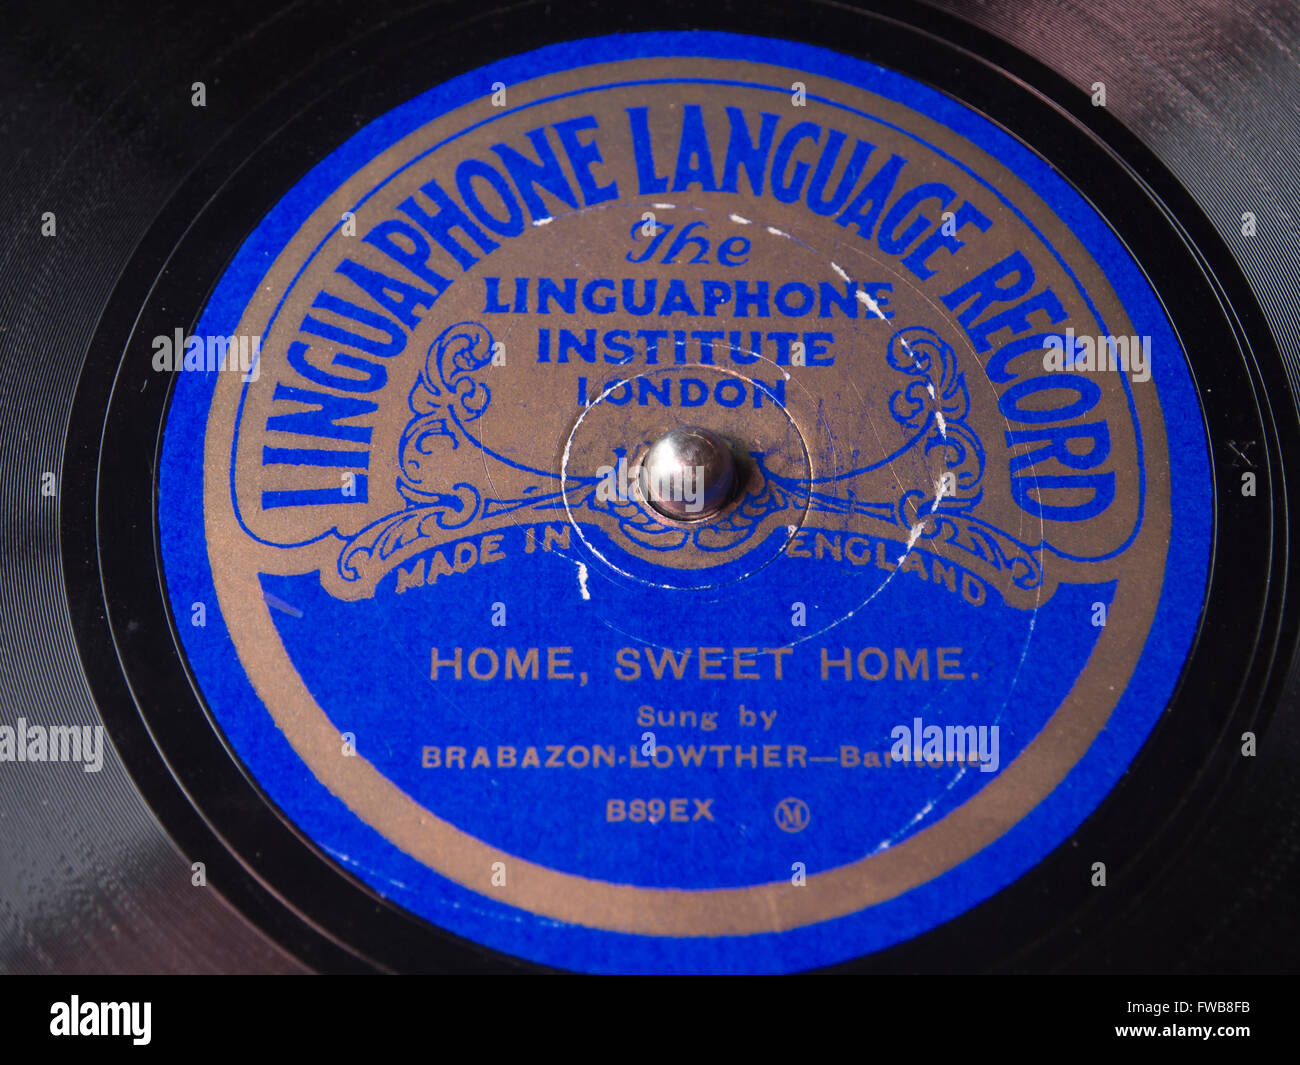 Linguaphone record language course, English songs, old shellac record "Home  sweet home" Brabazon Lowther baritone close up Stock Photo - Alamy